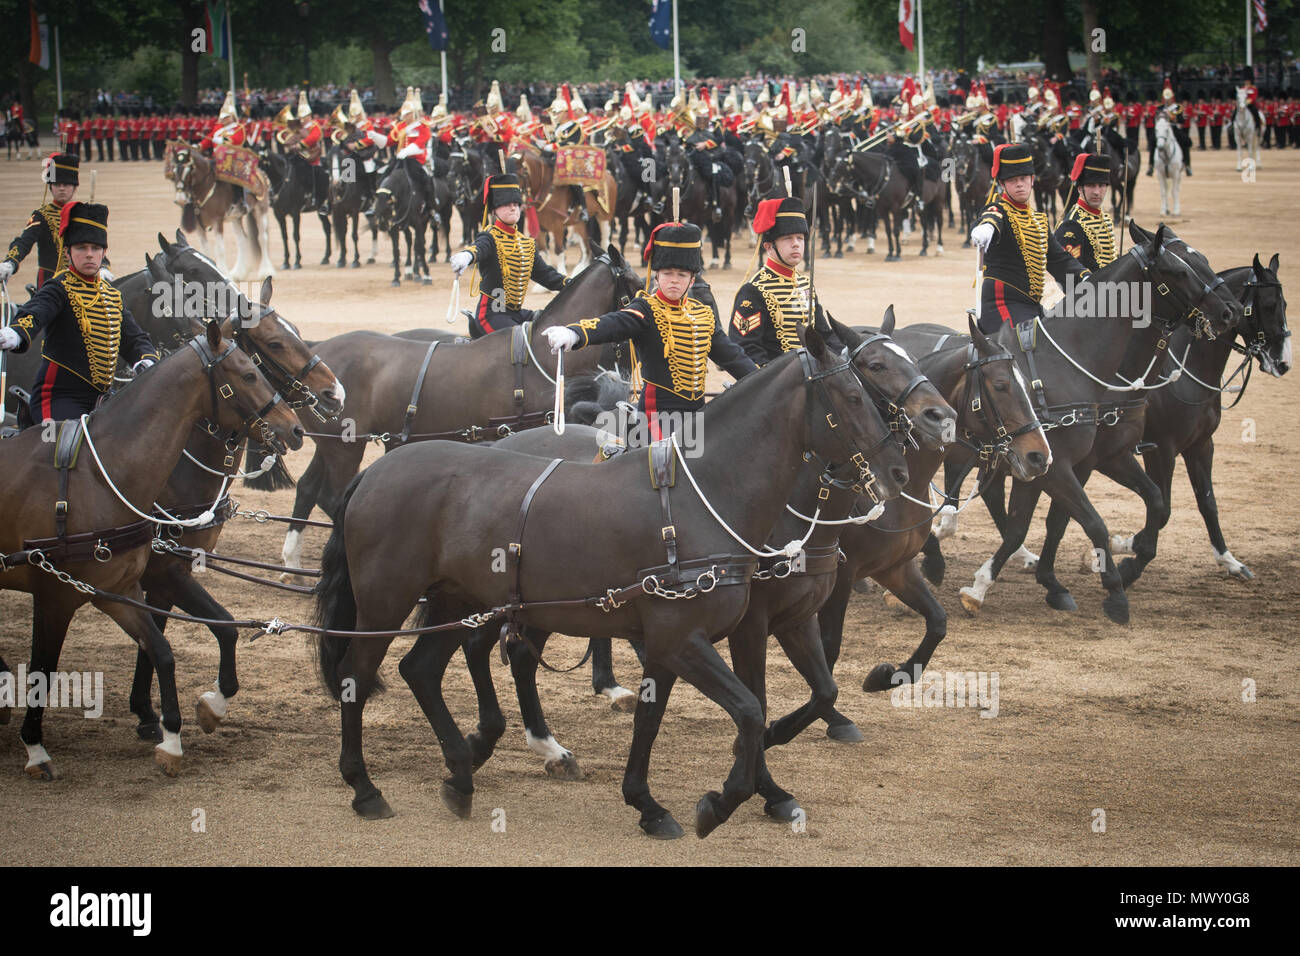 Soldiers on horseback during the Colonel's Review, which is the final rehearsal for Trooping the Colour, the Queen's annual birthday parade, in Central London. Stock Photo